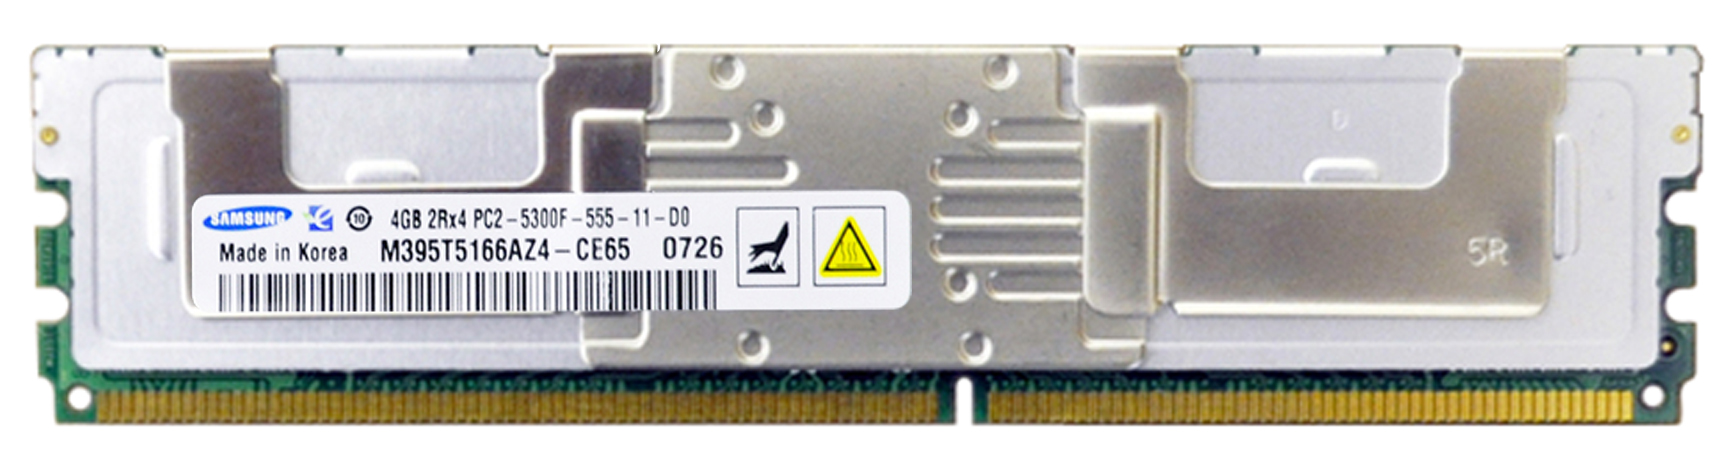 3DDLA1547159 3D Memory 4GB PC2-5300 DDR2-667MHz ECC Fully Buffered CL5 240-Pin DIMM Memory Module for PowerEdge M600 P/N (compatible with A1547159, F51272F51, A0763303, 39M5796, 43R1773)